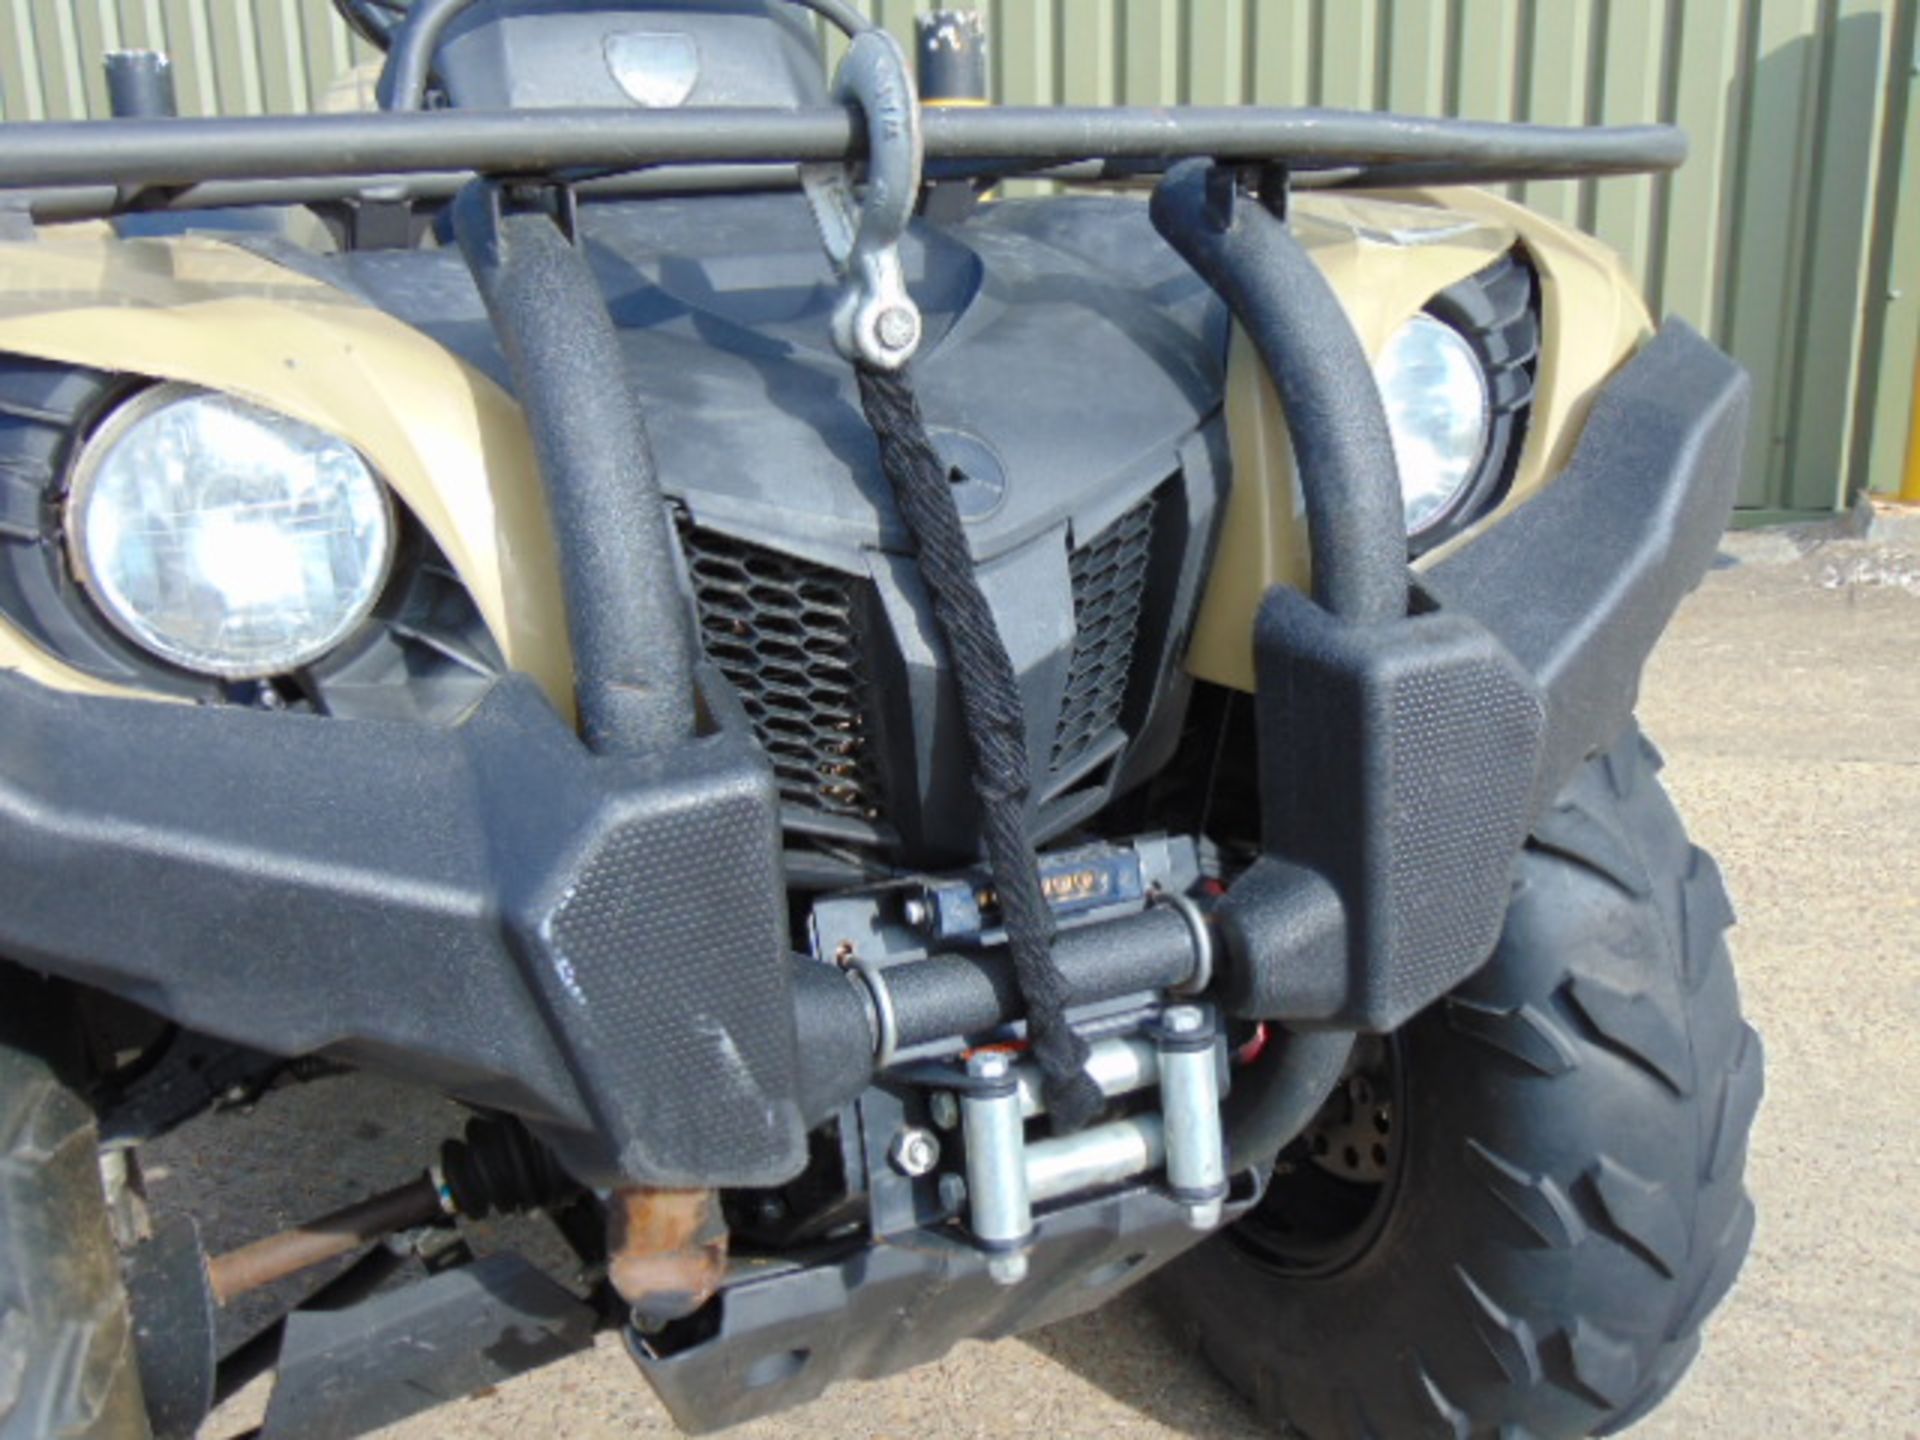 Military Specification Yamaha Grizzly 450 4 x 4 ATV Quad Bike Complete with Winch ONLY 130 HOURS! - Image 11 of 20